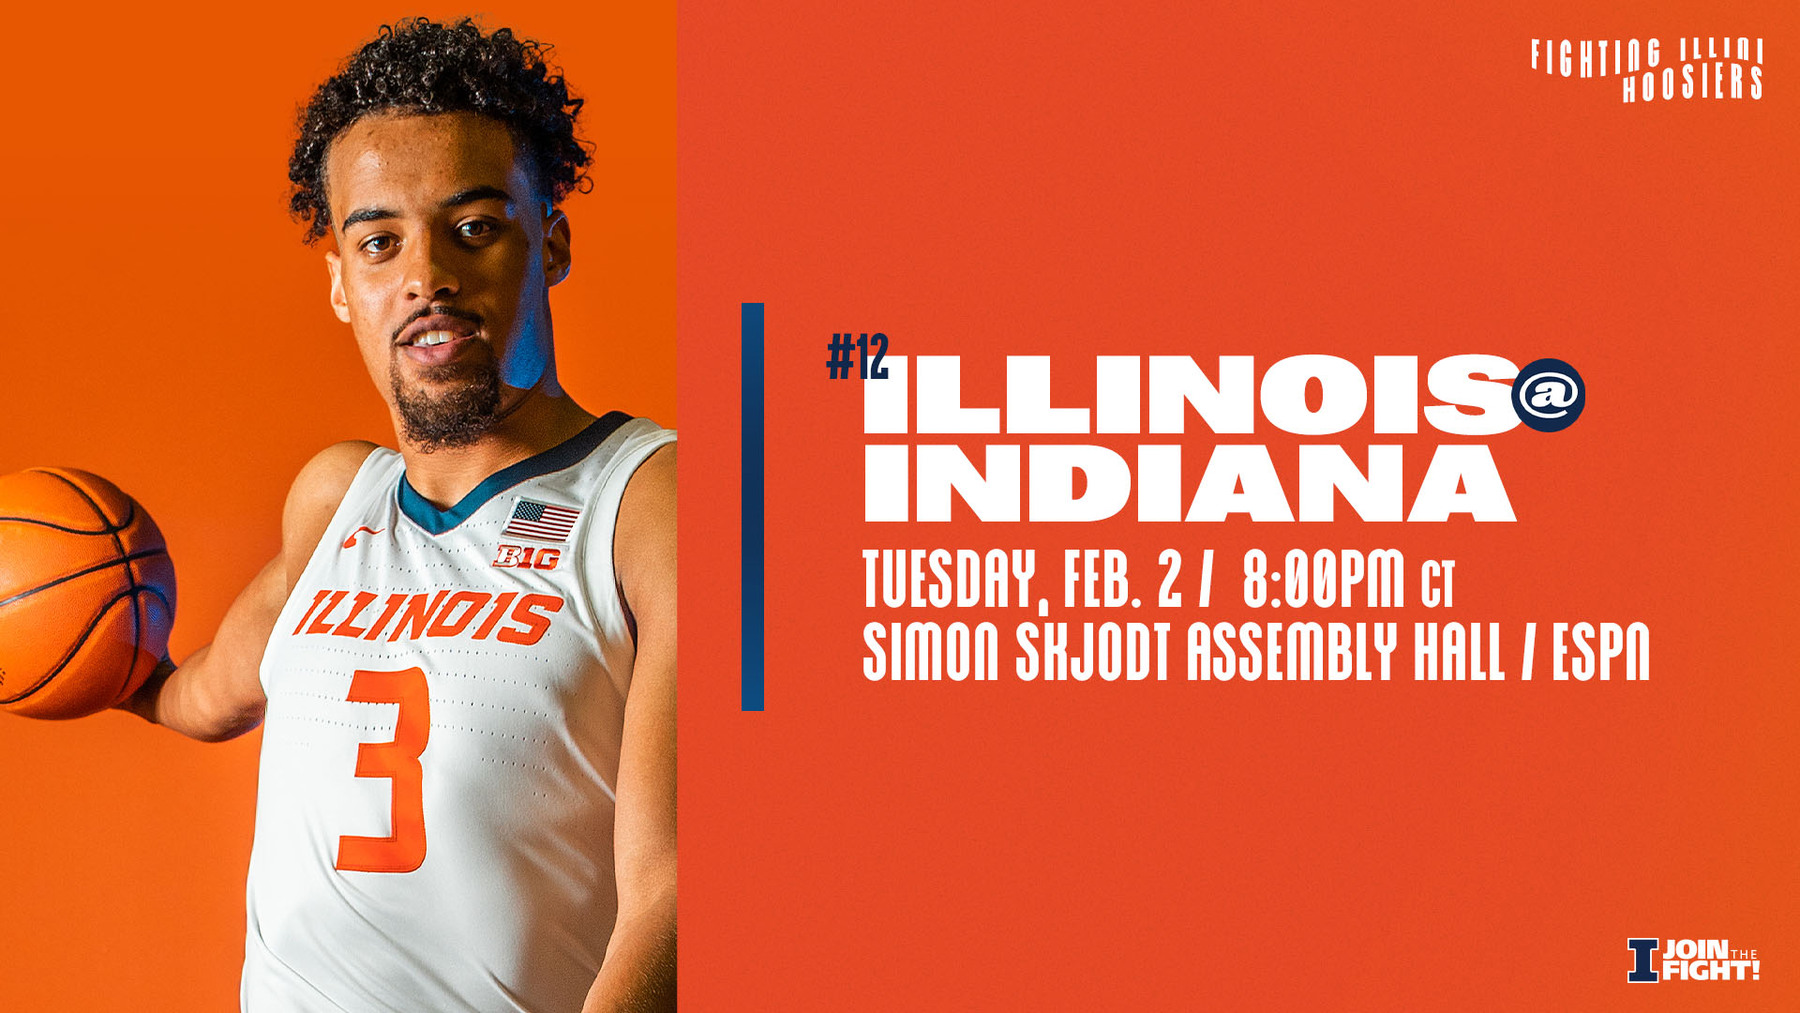 redshirt junior Jacob Grandison featured on the graphic promoting Illinois vs. Indiana matchup